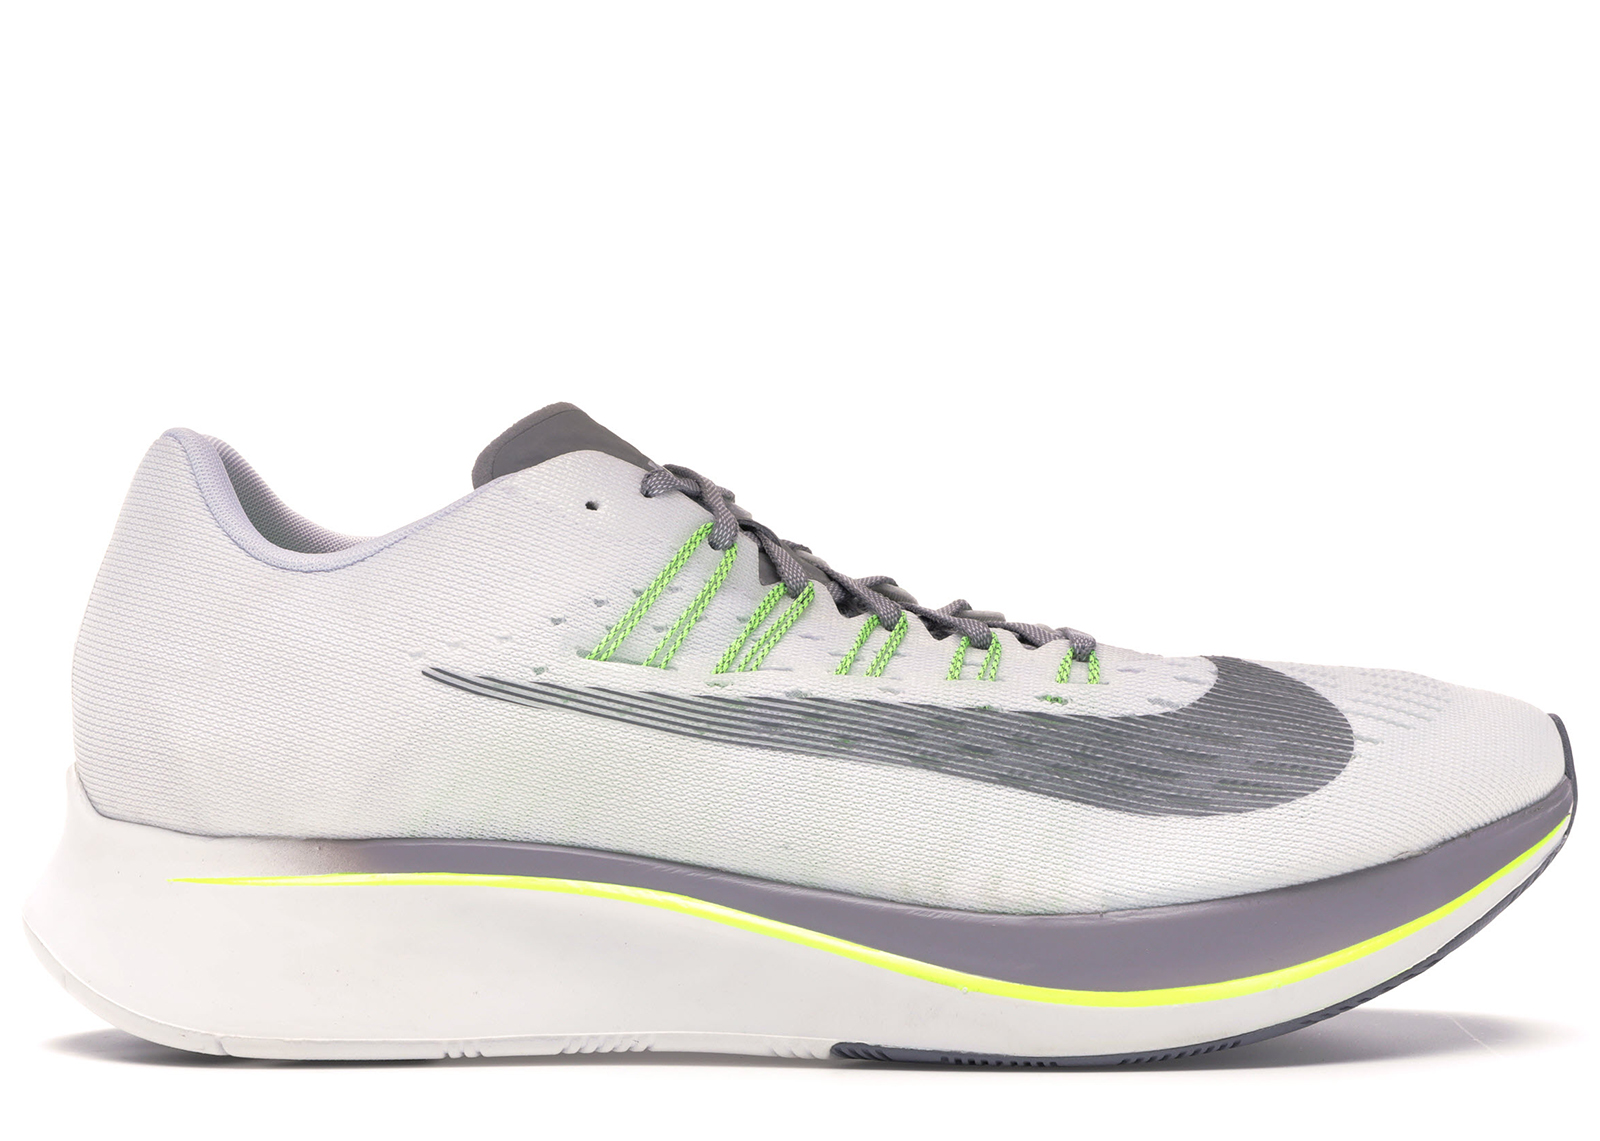 Nike Zoom Fly SP White Atmosphere Grey Volt